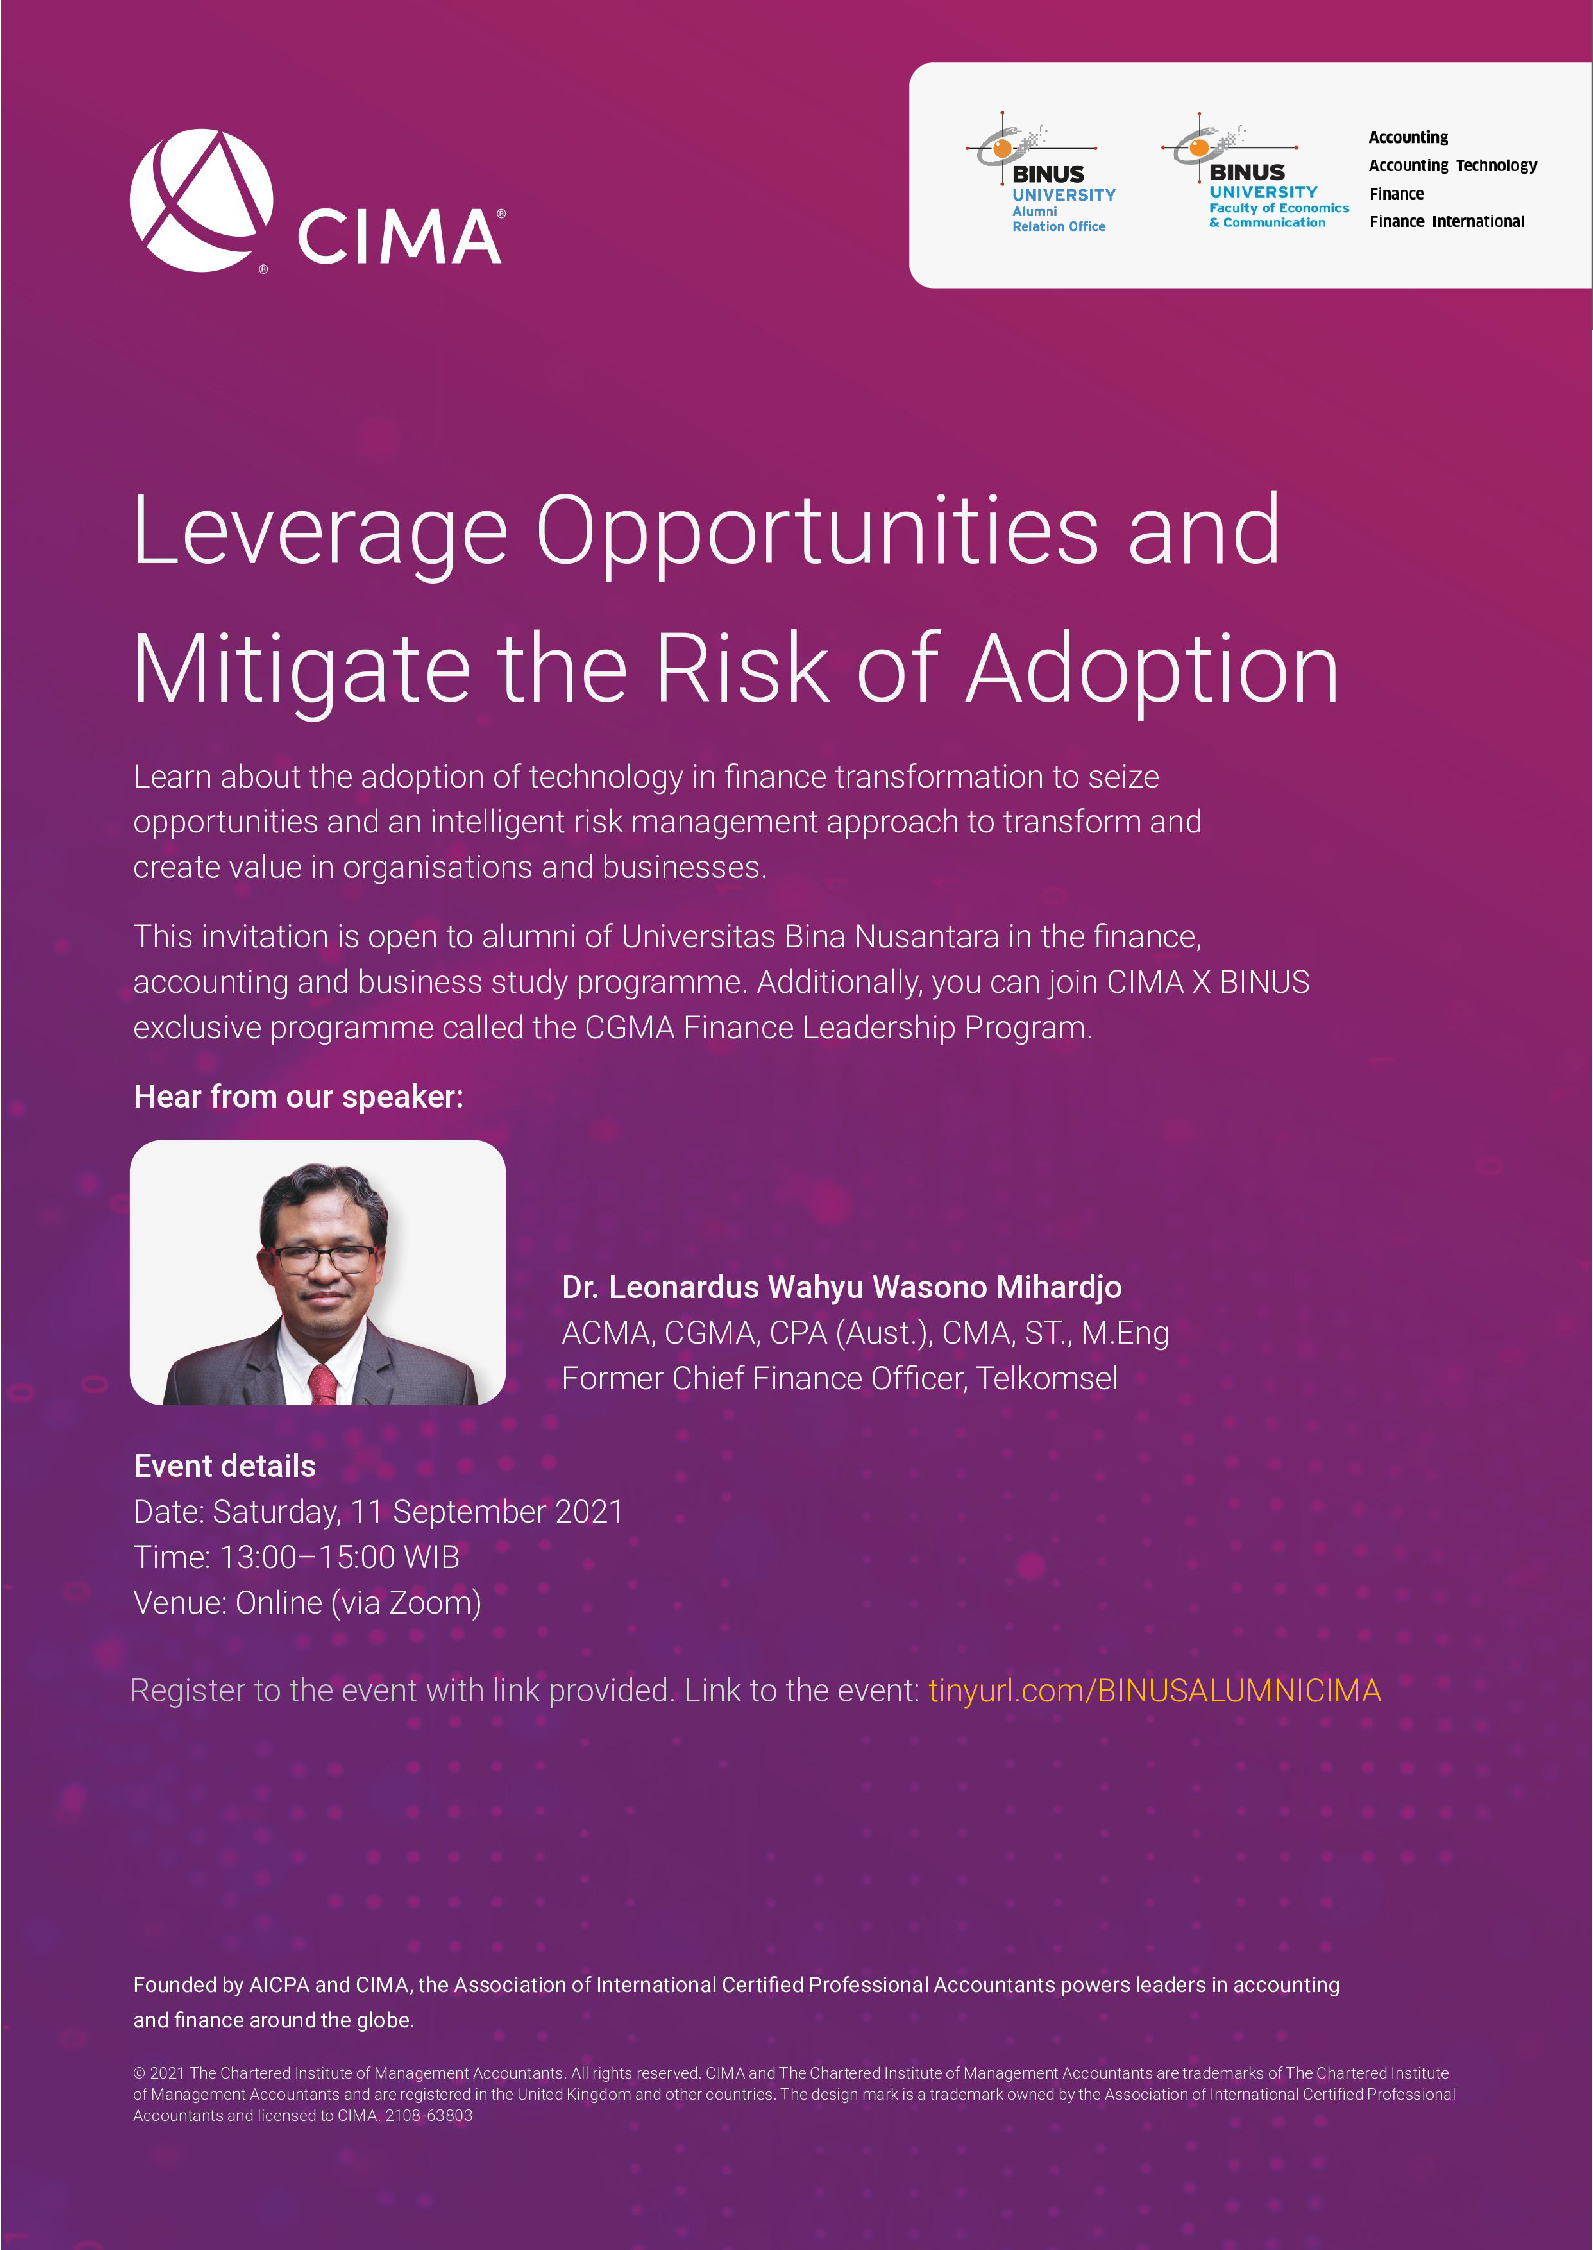 Leverage Opportunities and Mitigate the Risk of Adoption